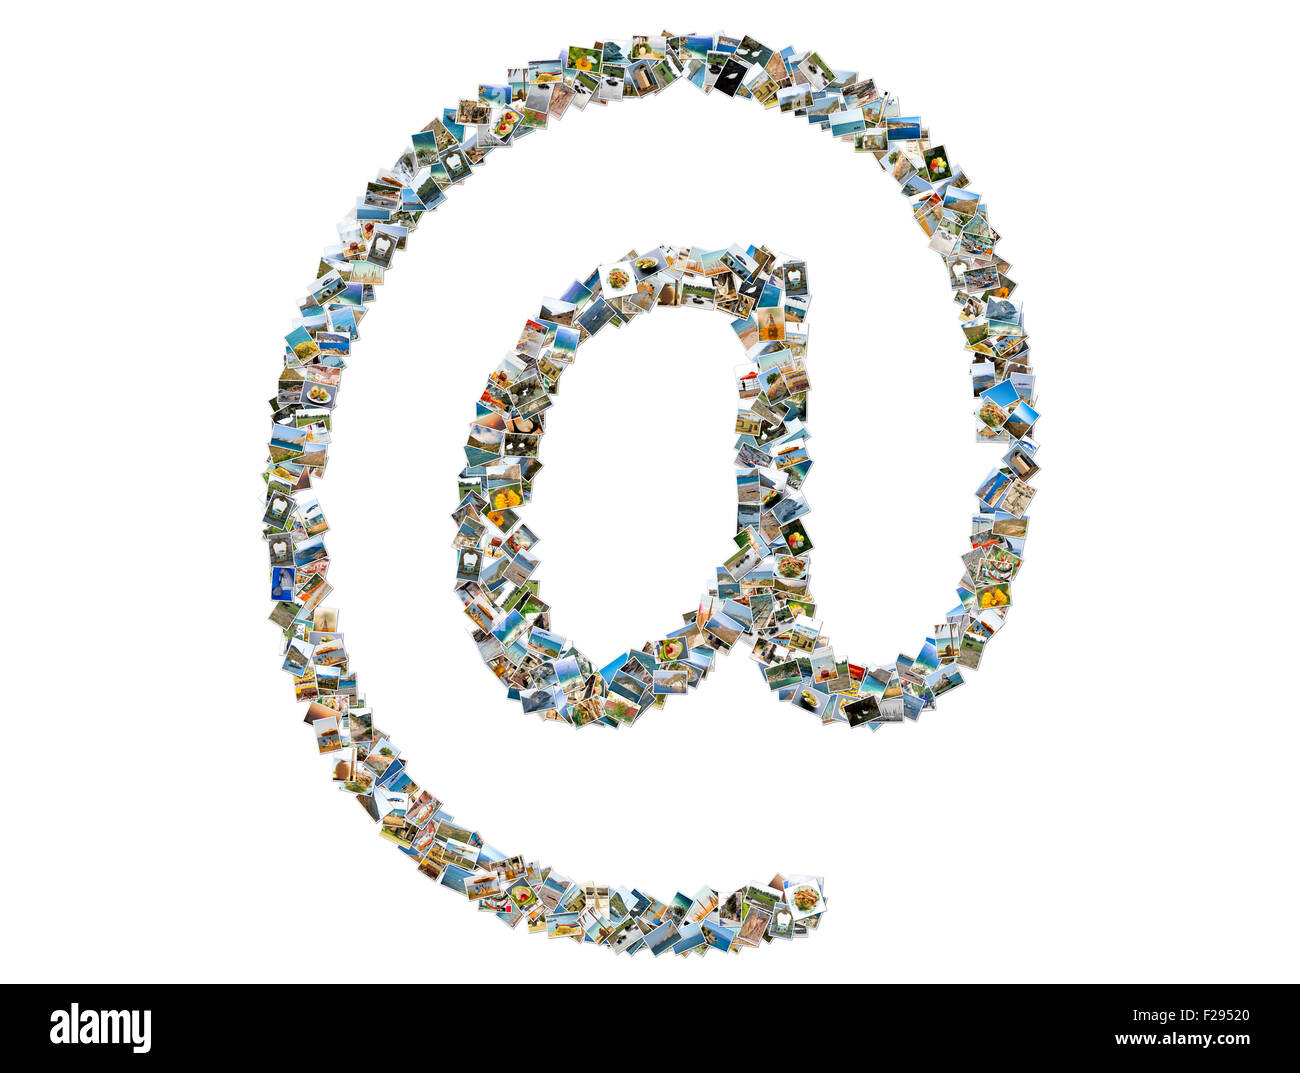 Email symbol, photos collage isolated on a white background Stock Photo